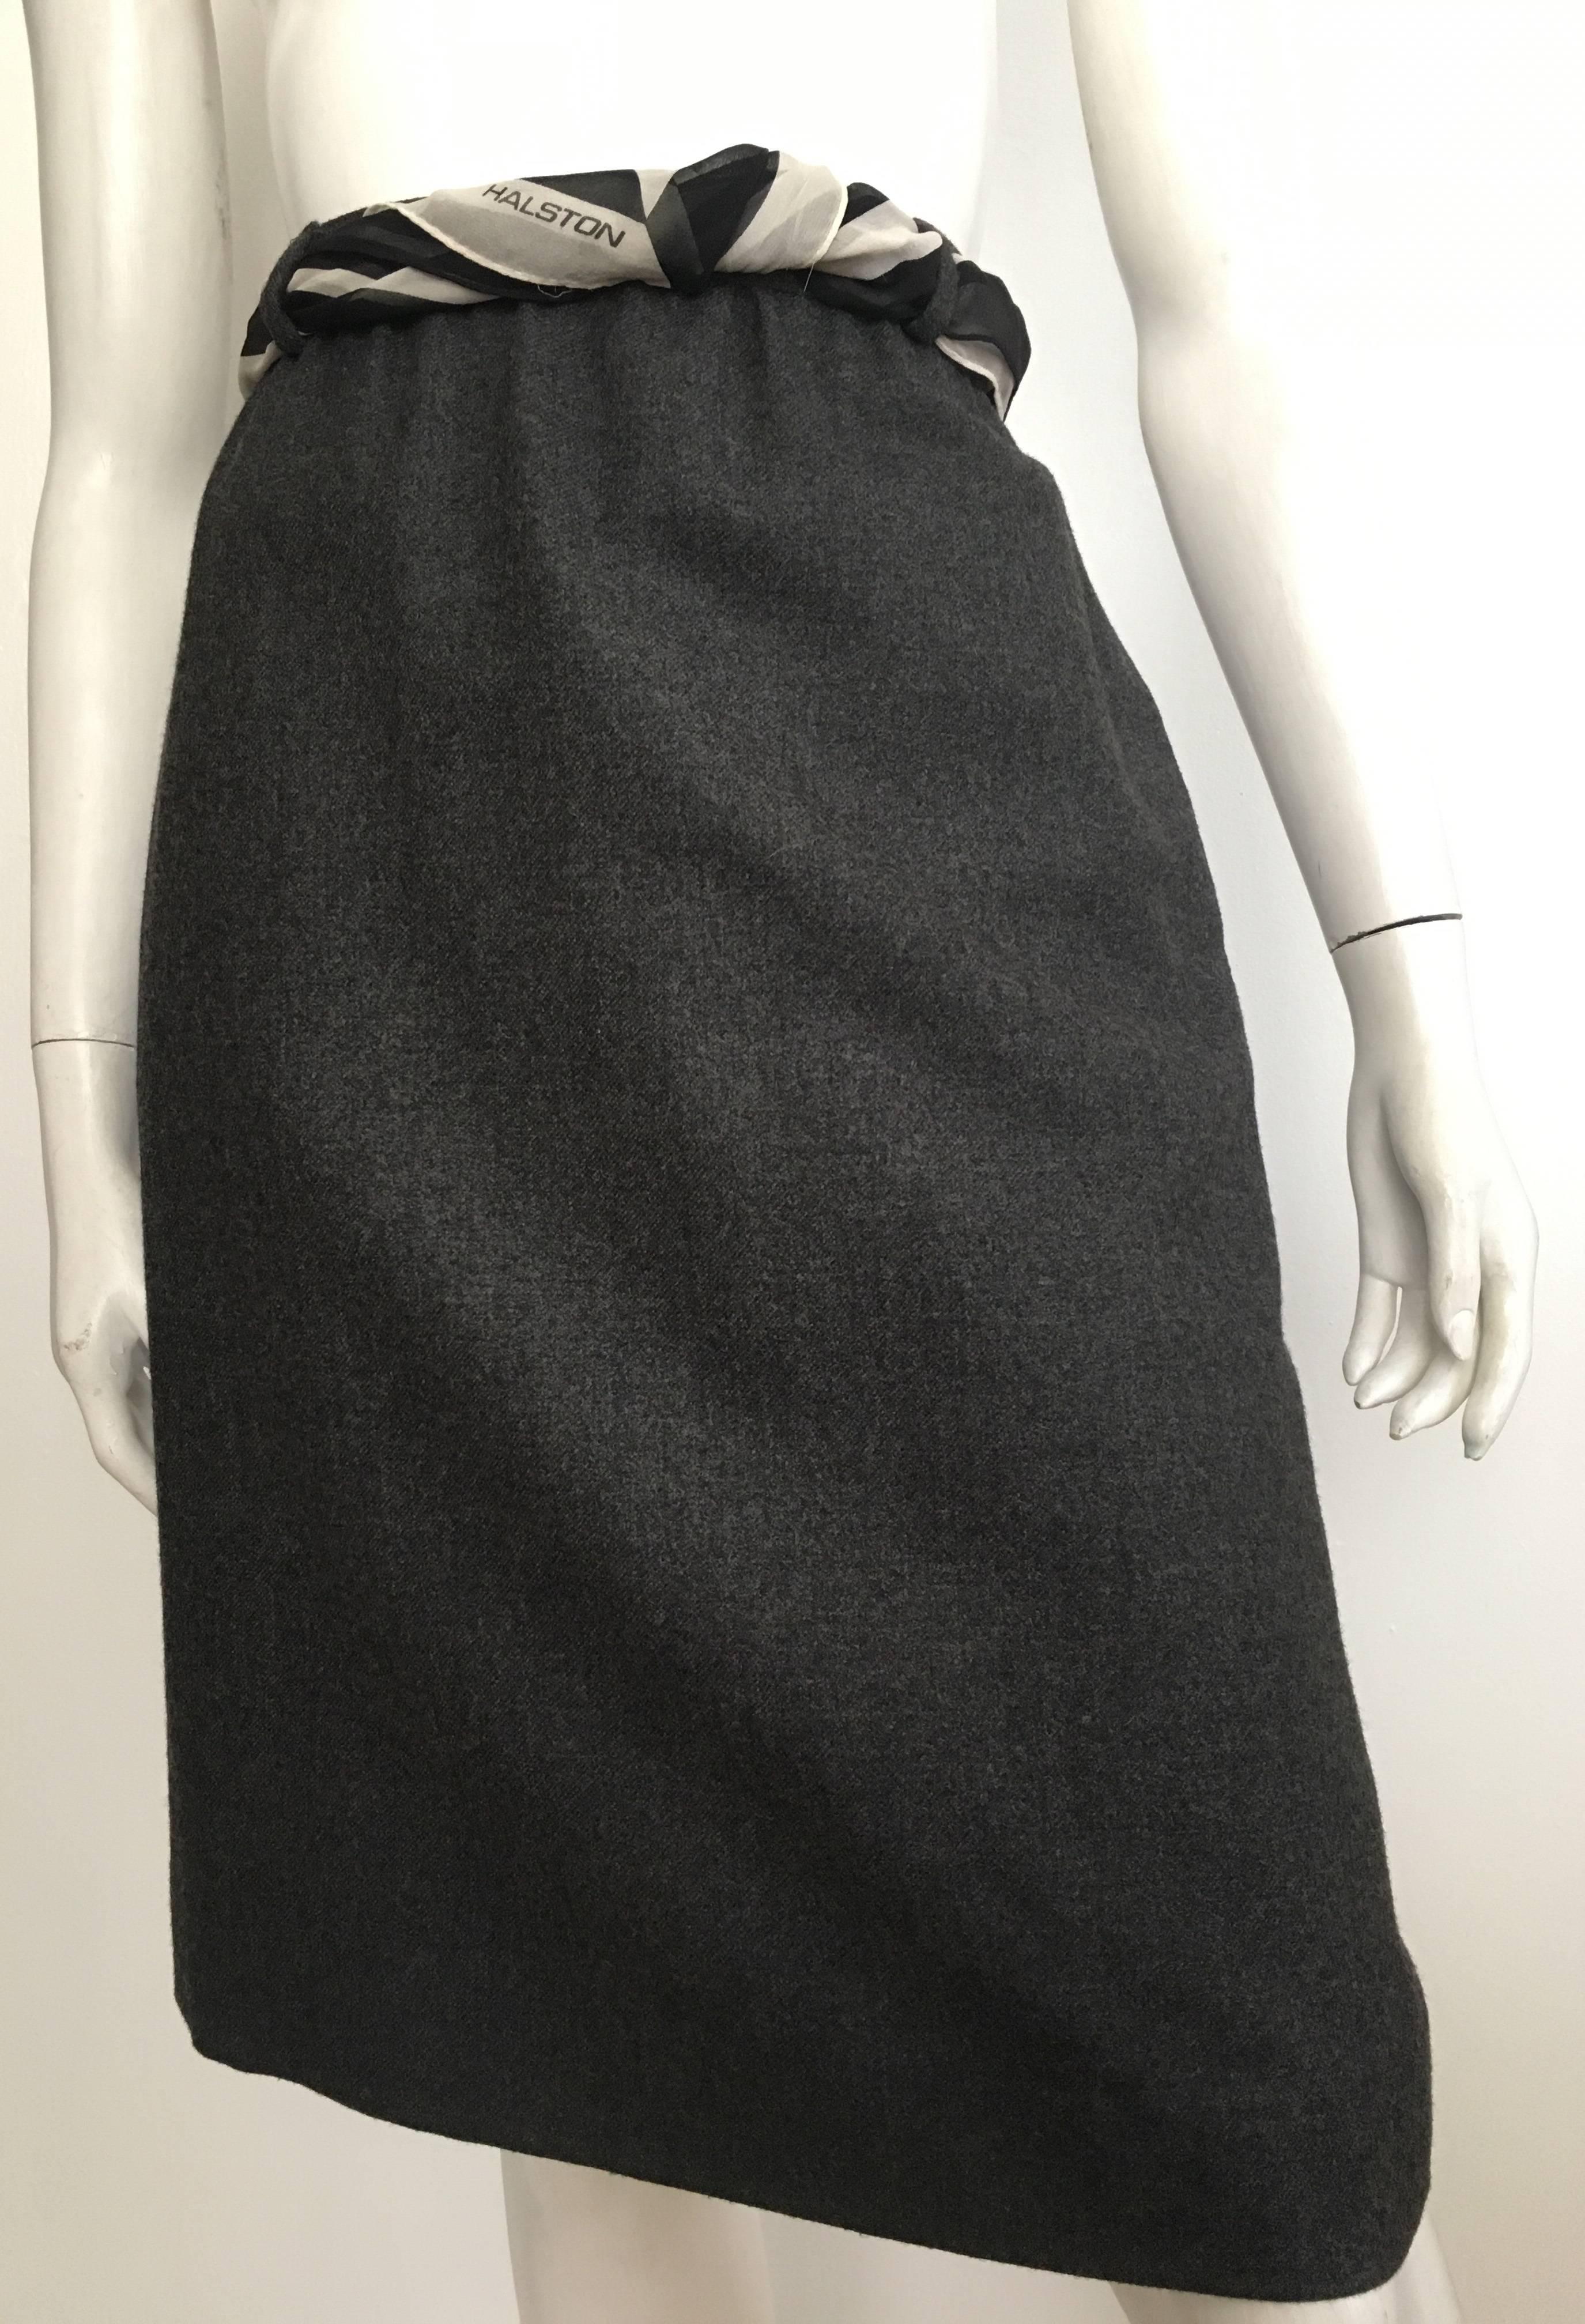 Valentino grey wool pencil skirt with pockets is an Italian size 46 and fits a USA size 10. The waist is 33.3/4" so ladies please grab your tape measure so you can measure your waist & hips to make certain this classic Valentino skirt will